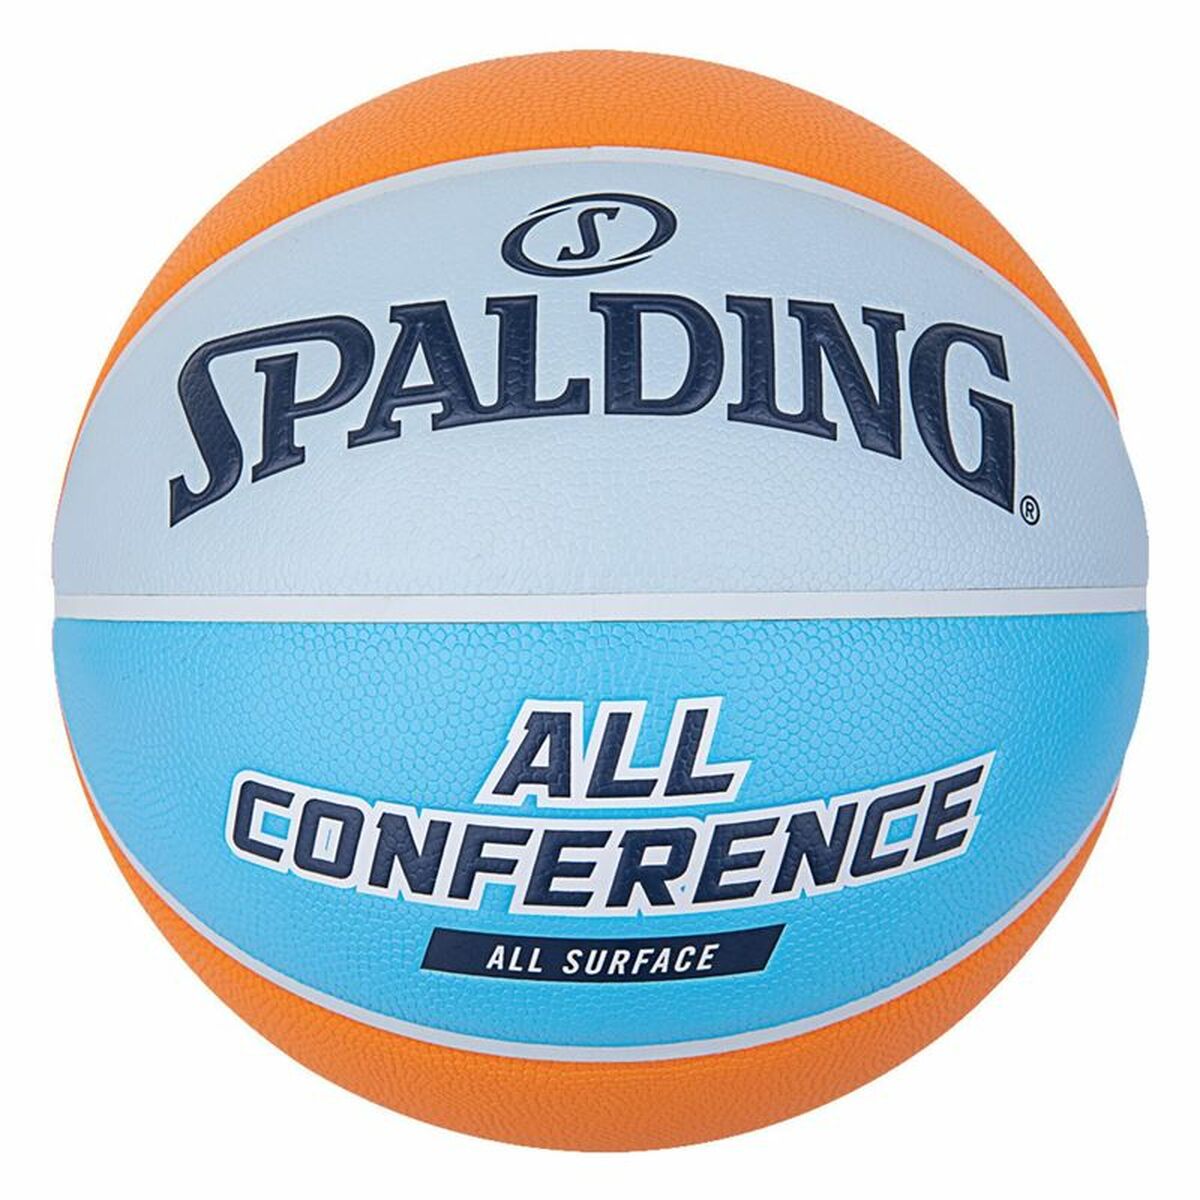 Basketball Spalding All Conference Orange Blau 5 All Surfaces